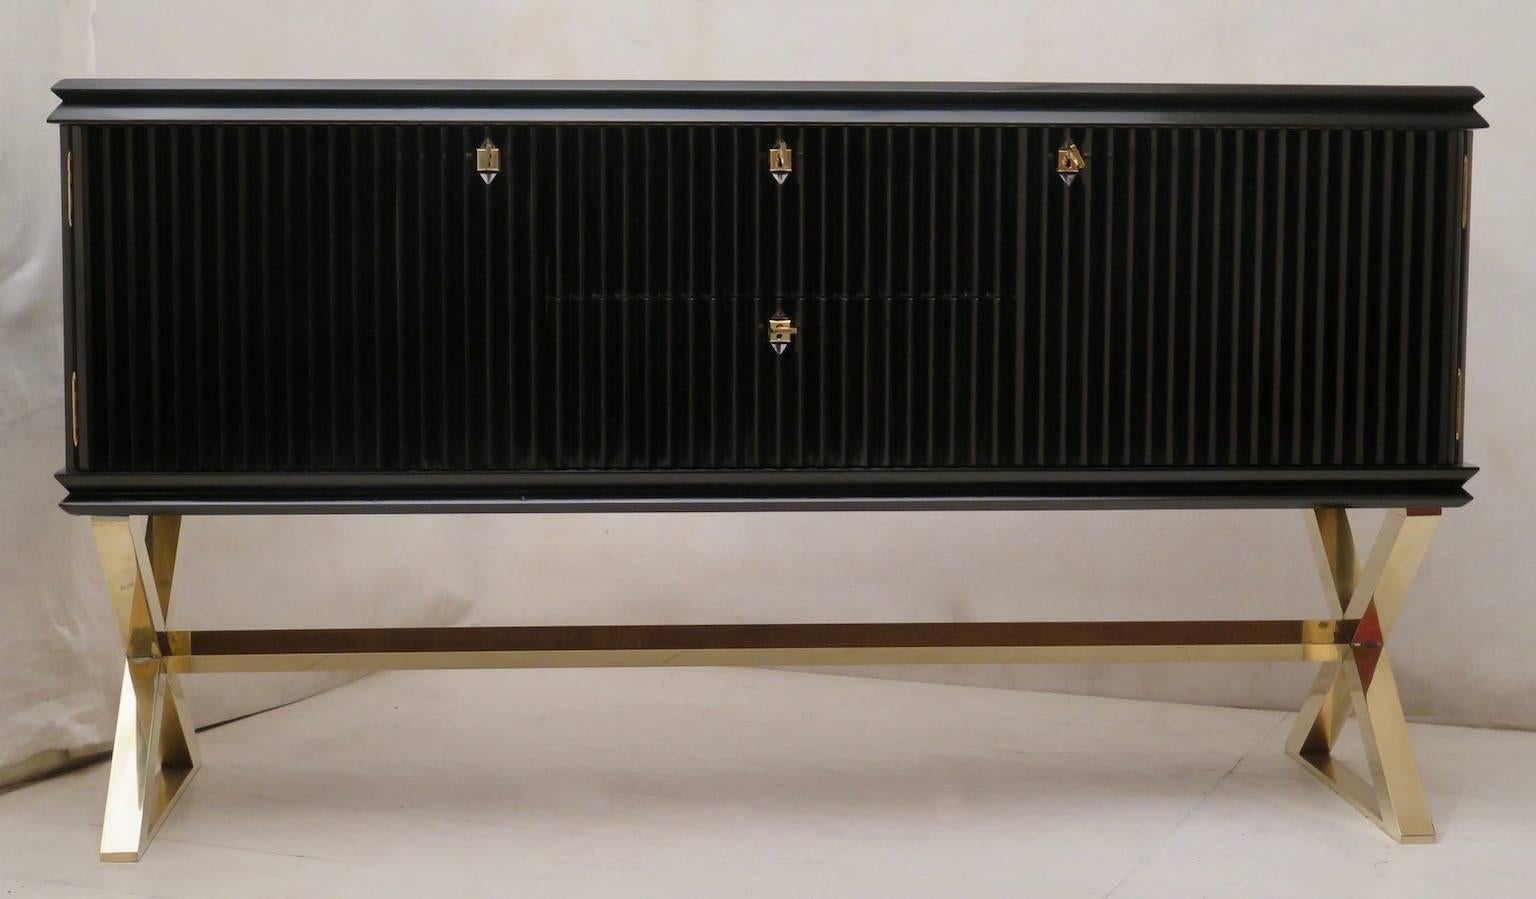 1950 Italian midcentury sideboard. All polished in black shellac, with polished brass leg. The body of the sideboard is composed of two side doors and two central drawers. Its top is smooth and polished all black. The sides and the front of the